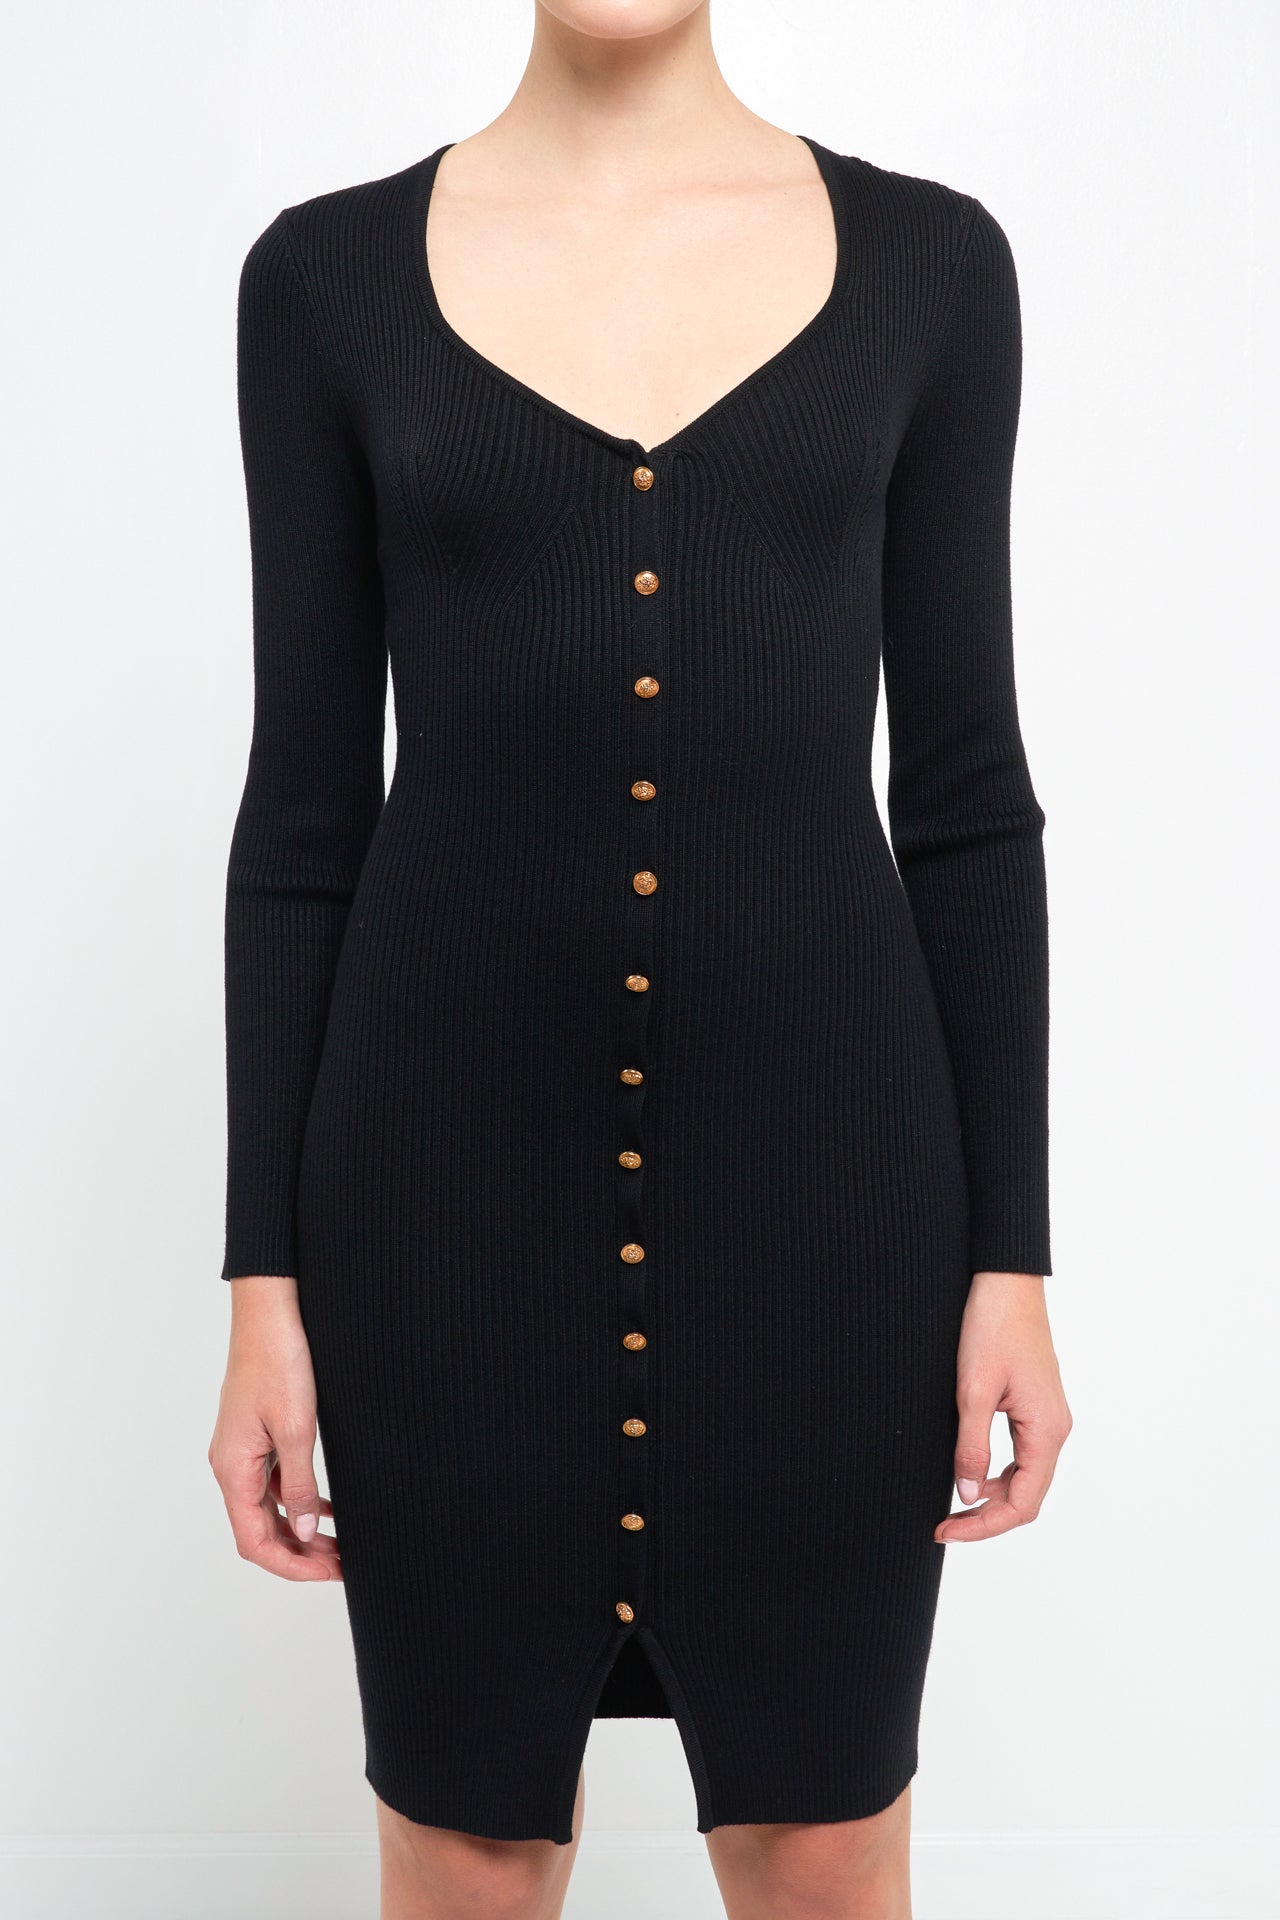 ENDLESS ROSE - Long Sleeve Button Down Knit Dress - DRESSES available at Objectrare